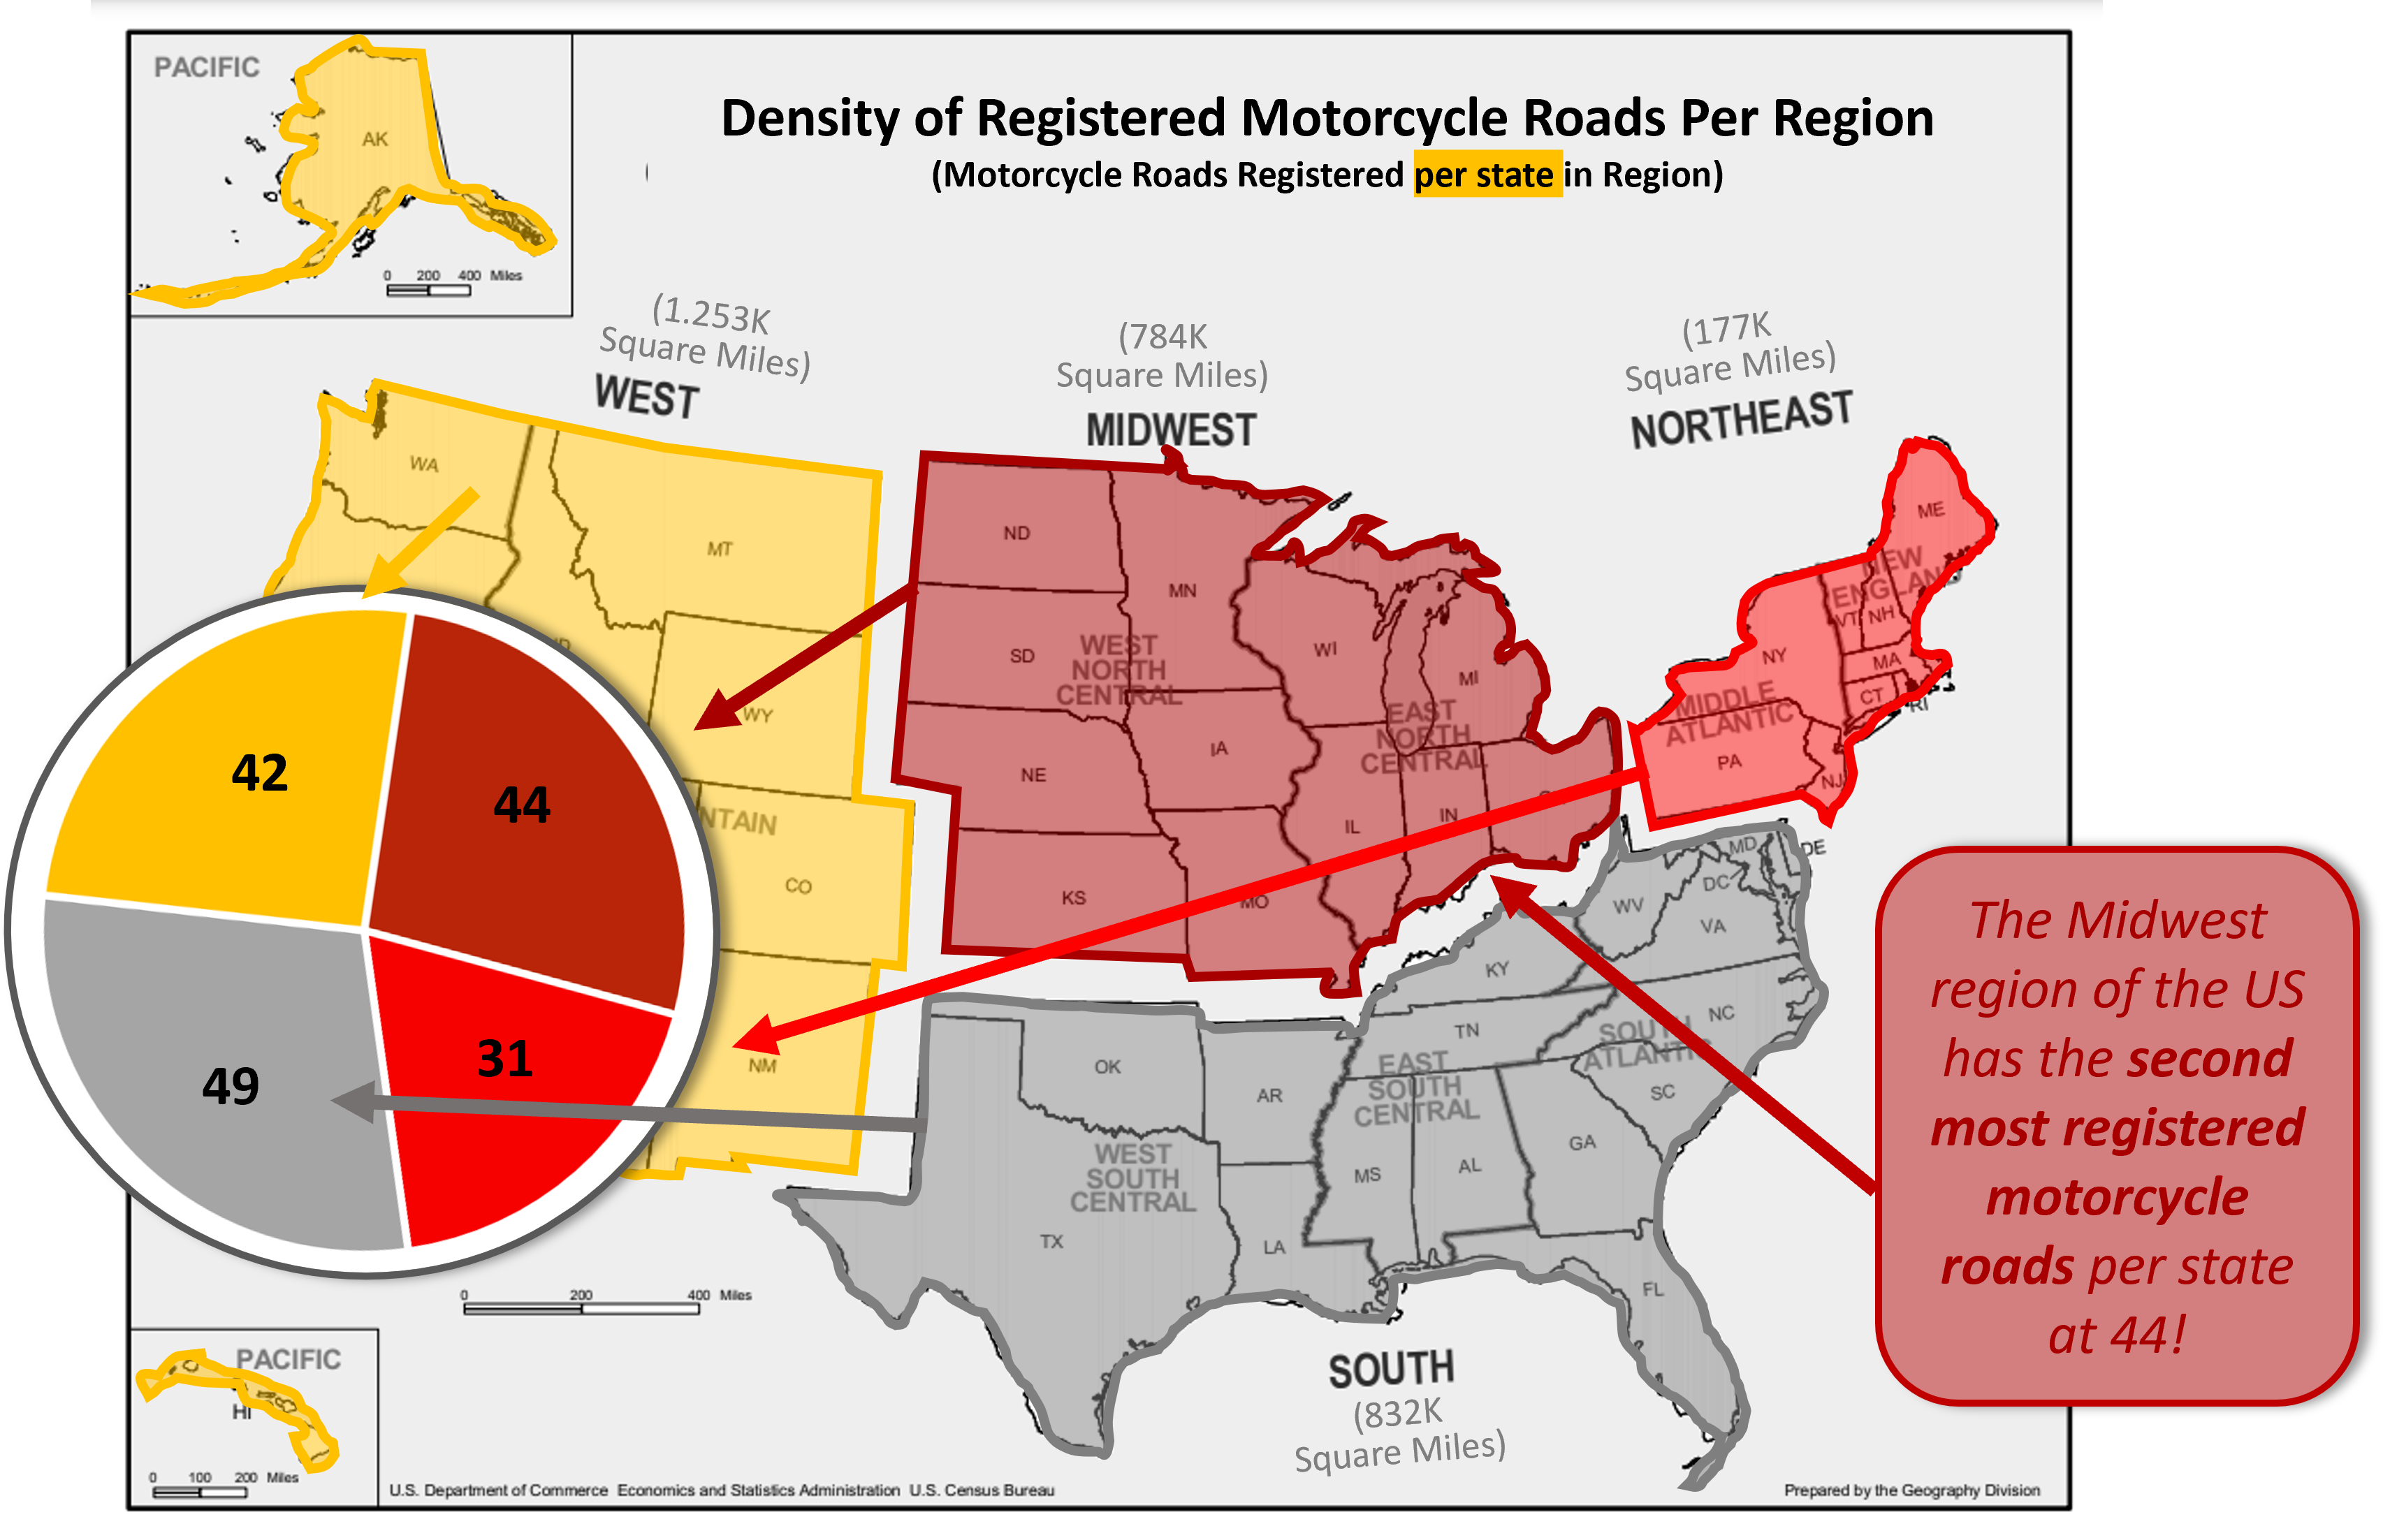 Midwest has second highest number of registered motorcycle roads per state